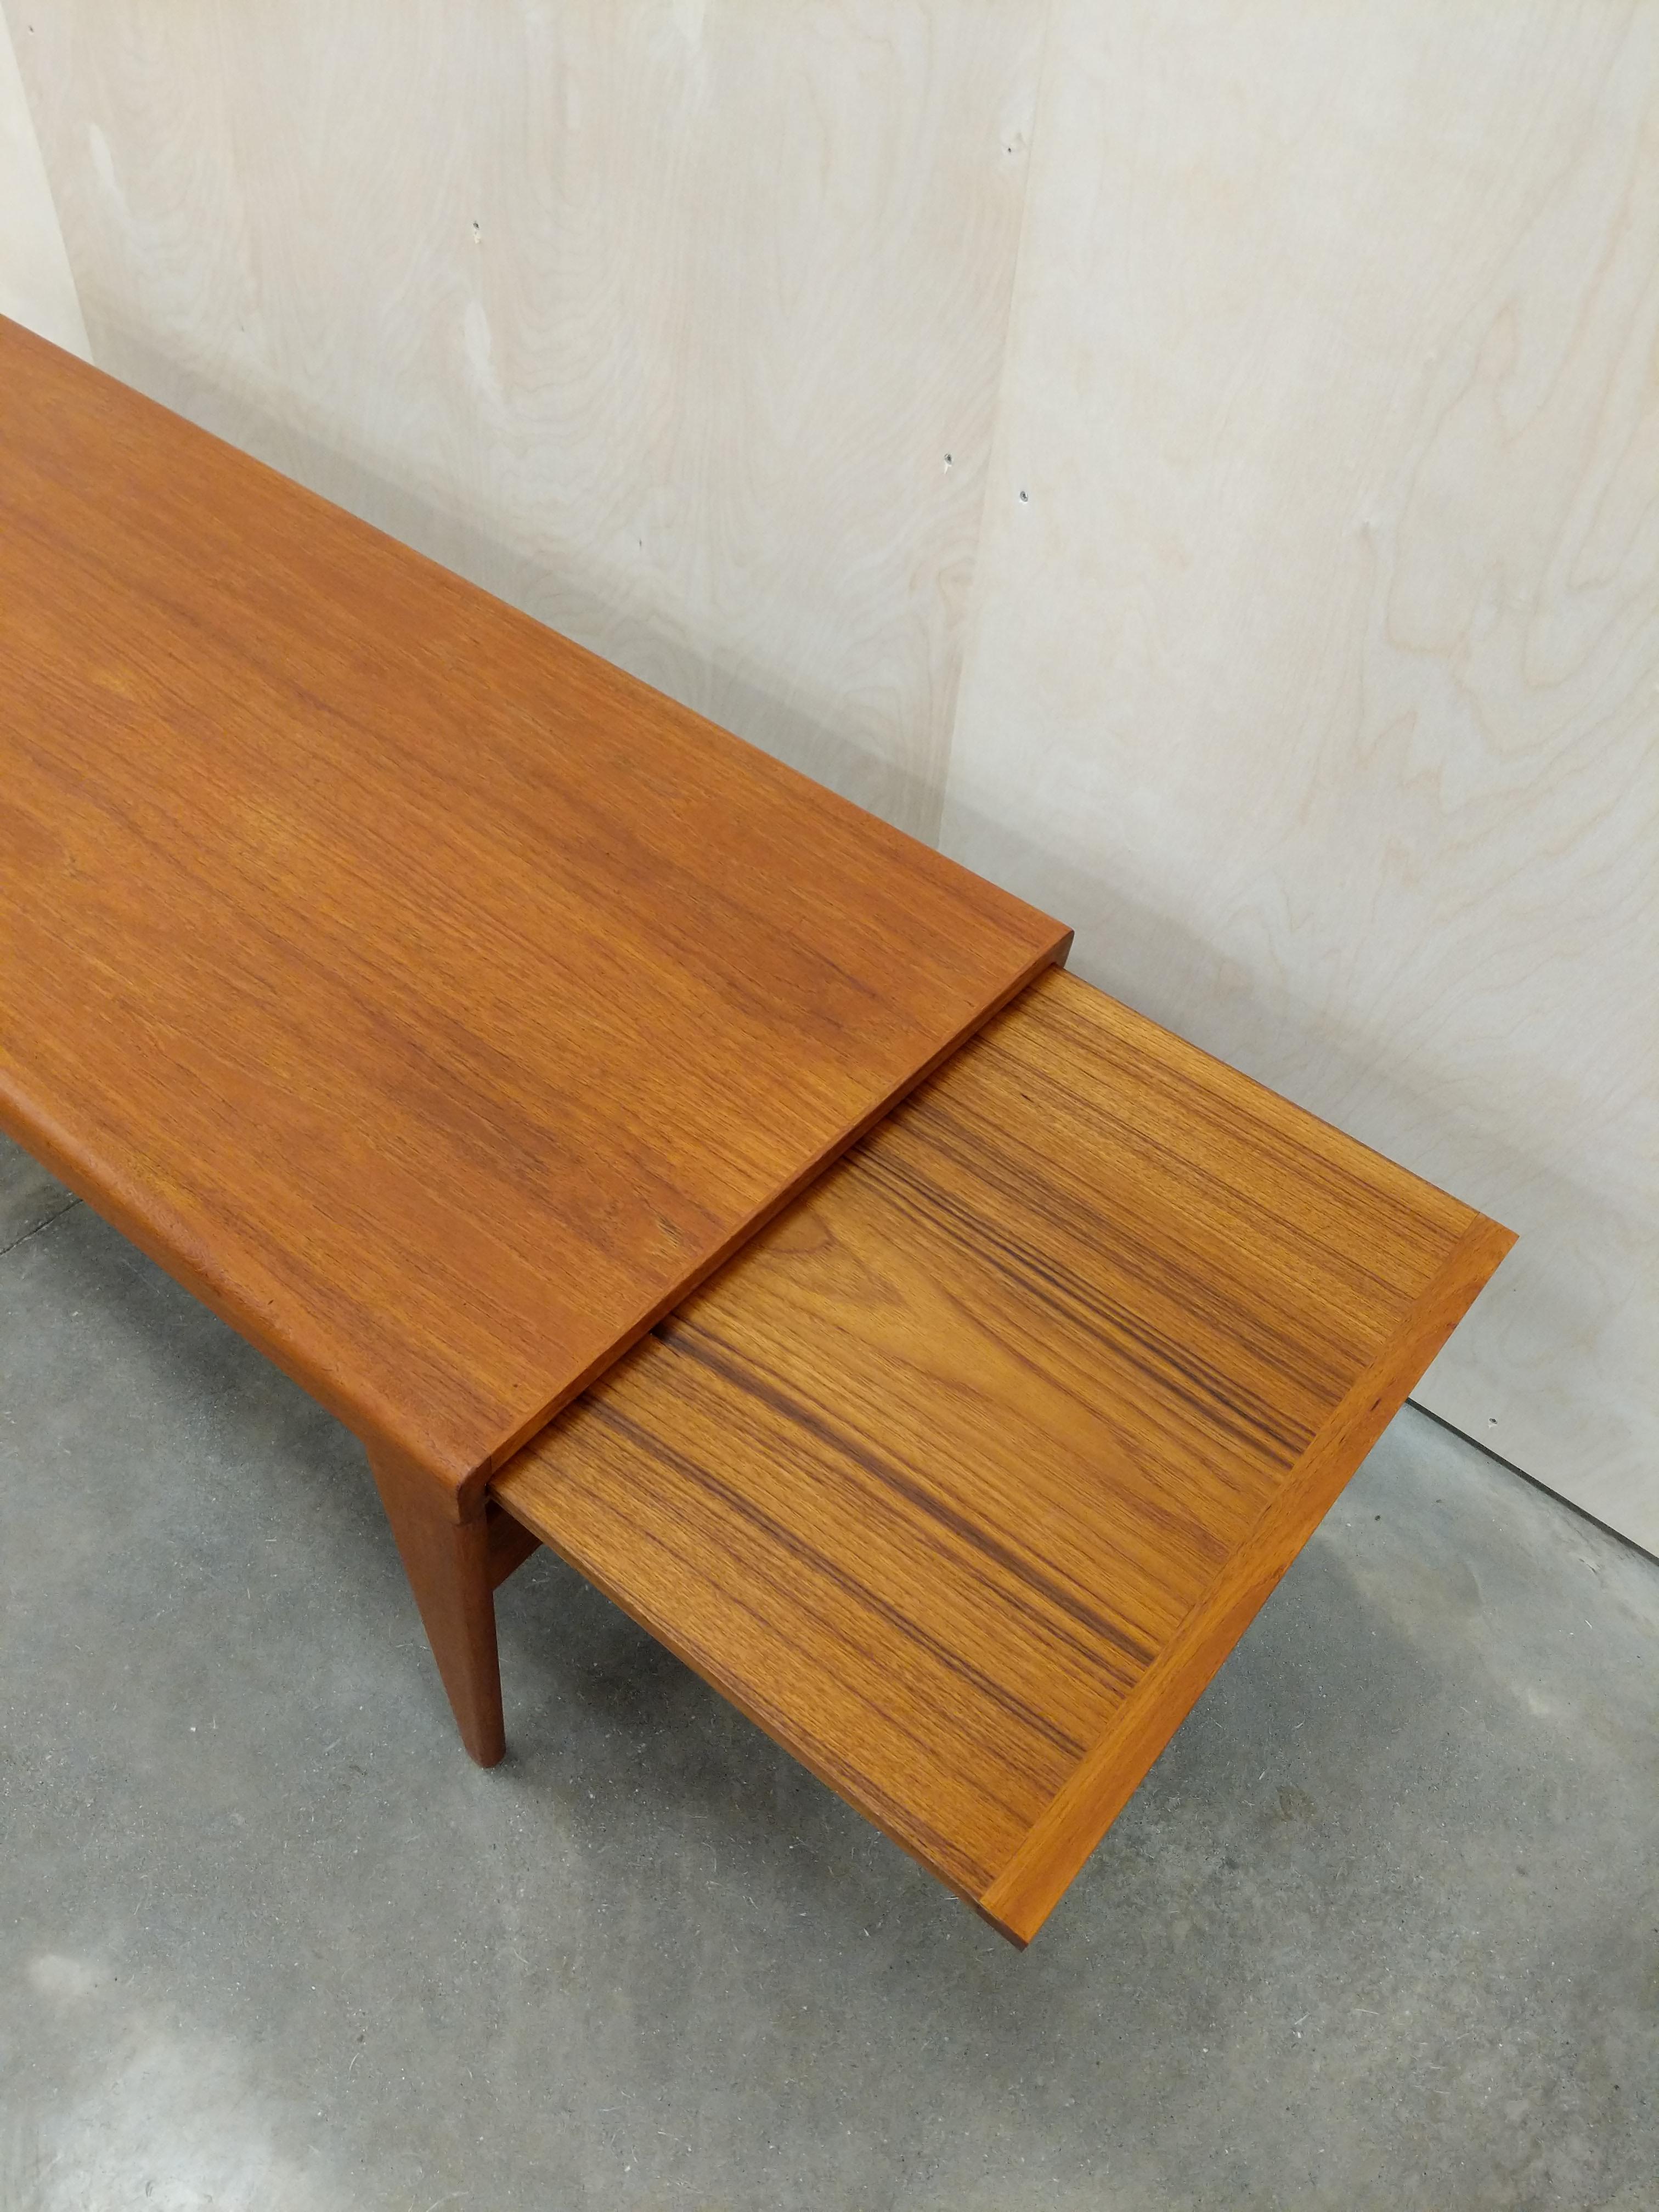 Vintage Danish Modern Teak Coffee Table In Good Condition For Sale In Gardiner, NY